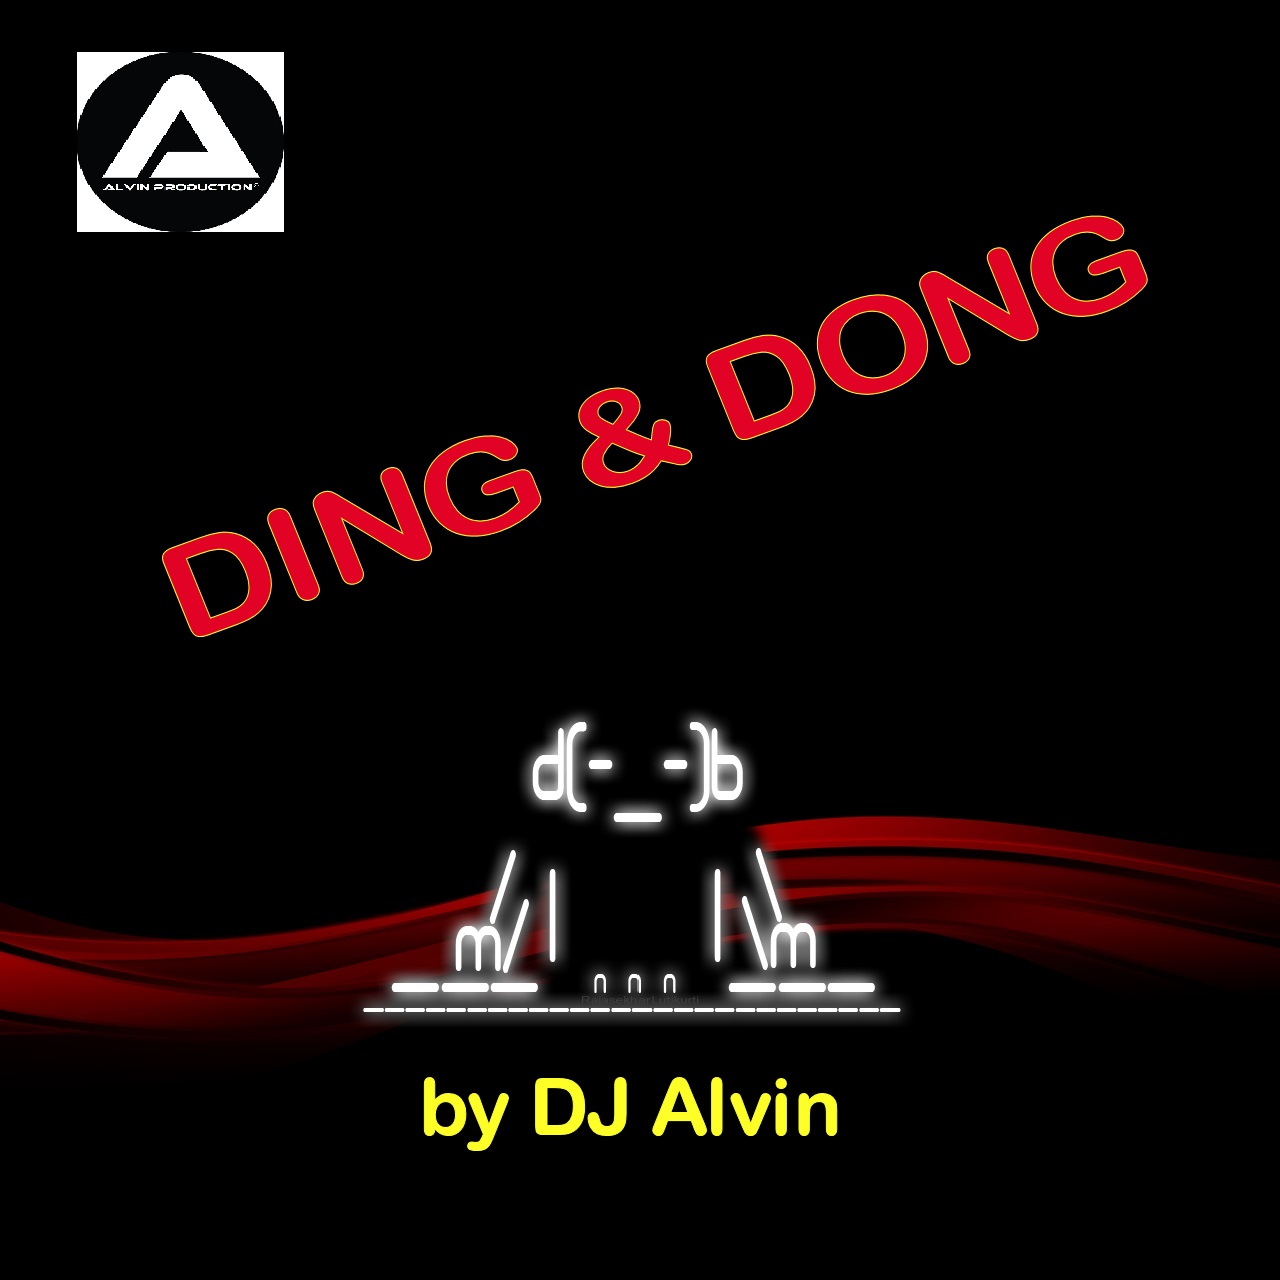 ★ Ding and Dong ★